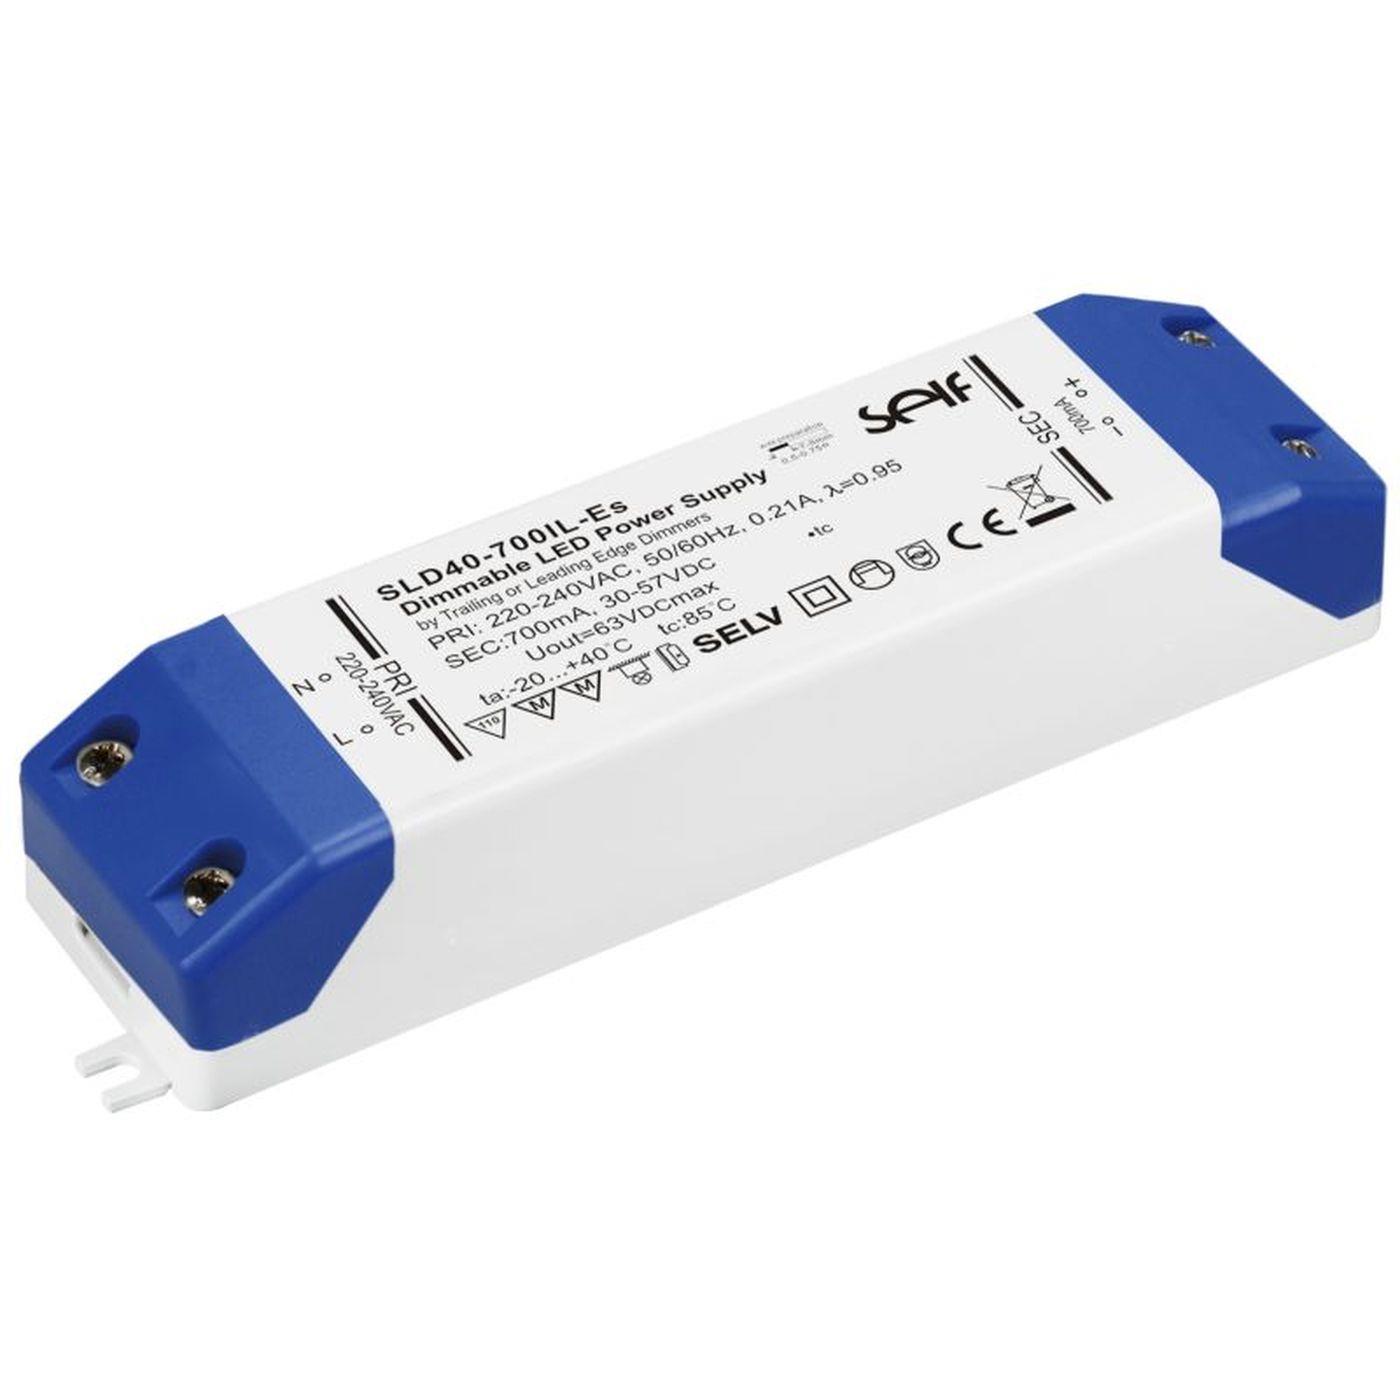 SLD40-700IL-ES 40W 700mA 30...55VDC Constant current LED power supply Driver Transformer Triac Dimmable